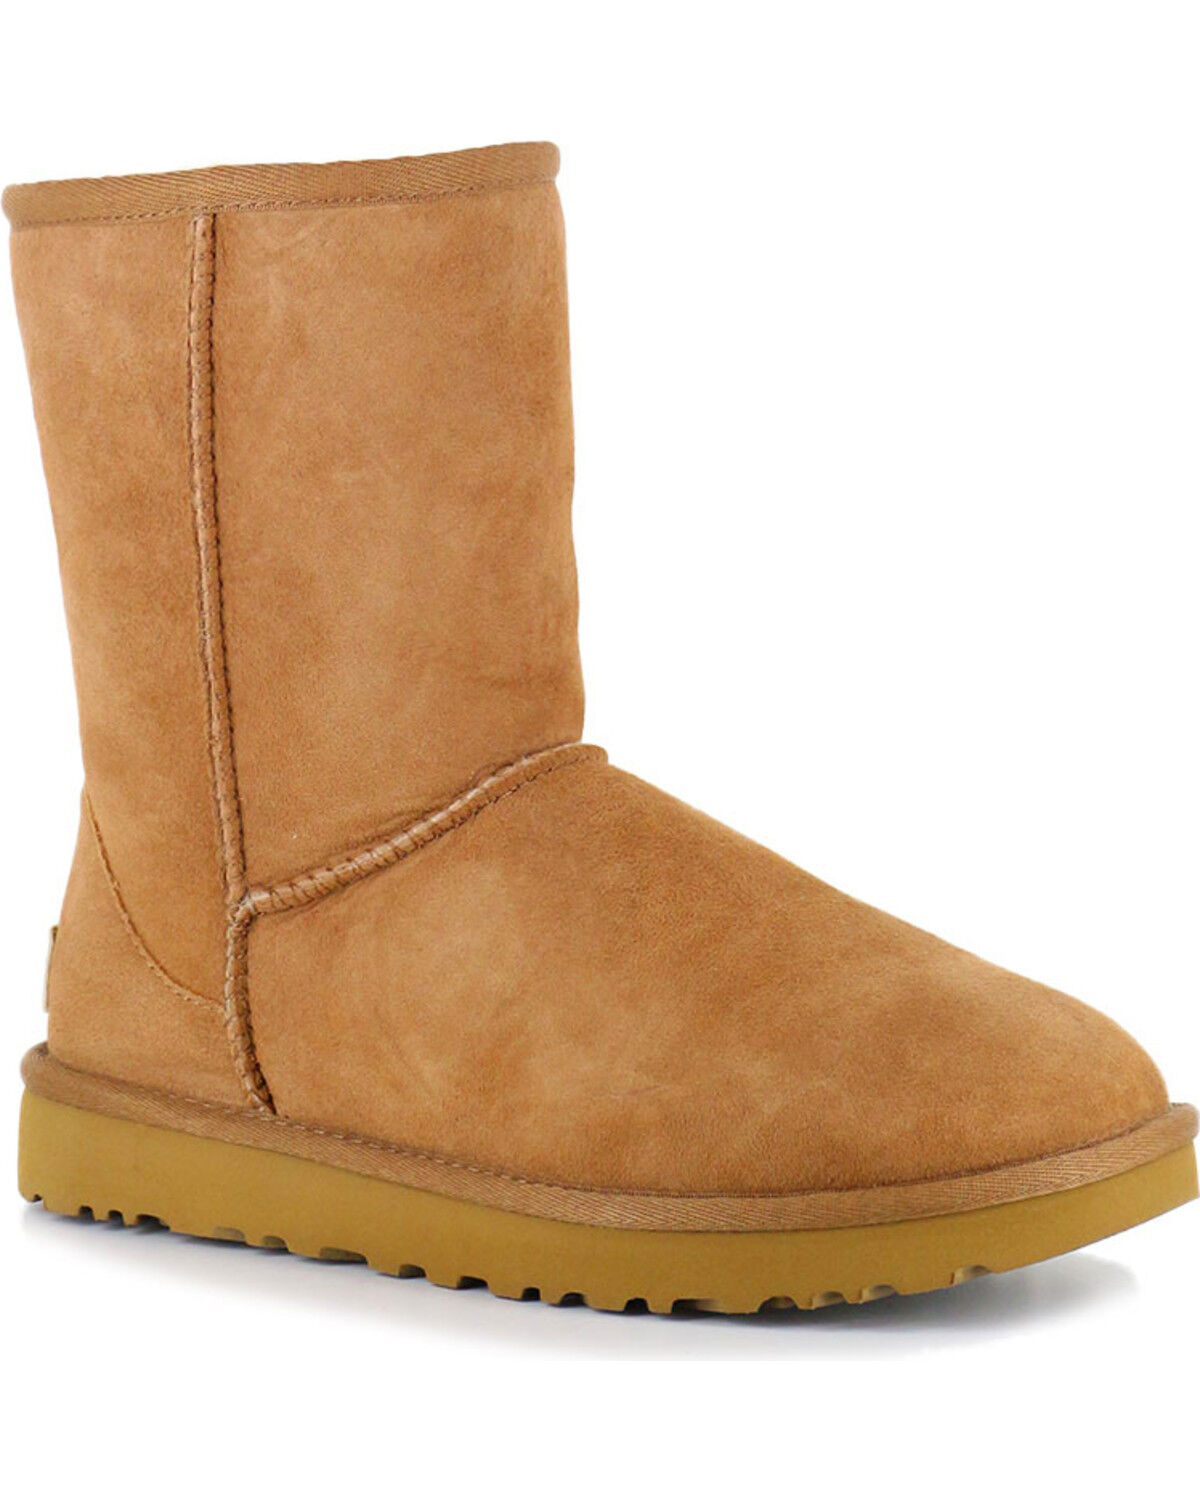 price for ugg boots